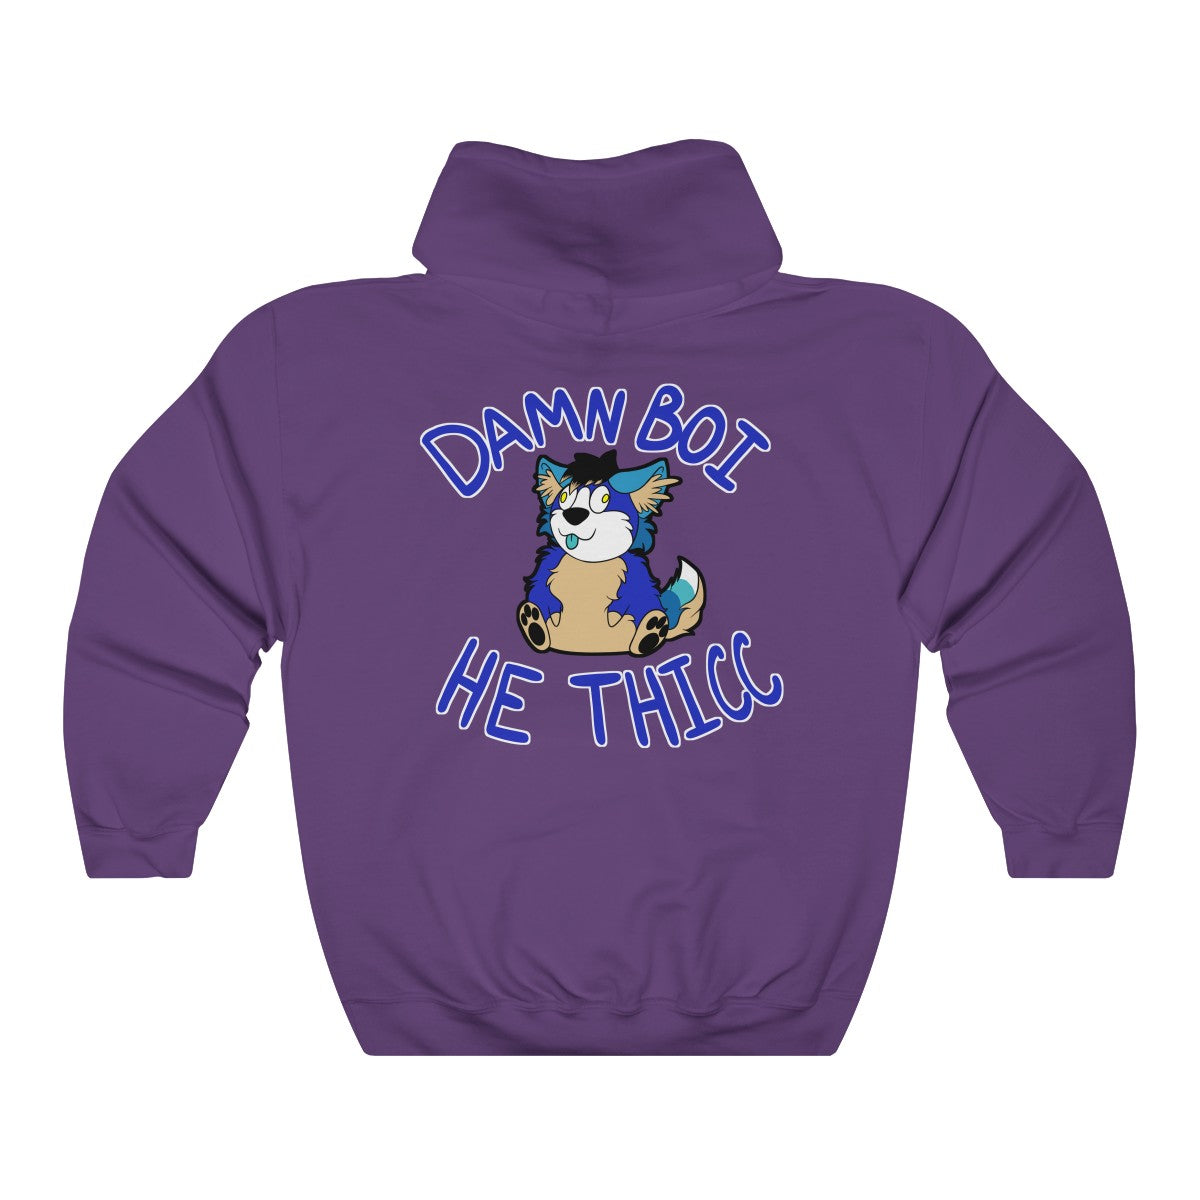 Thicc Boi With Text - Hoodie Hoodie AFLT-Hund The Hound Purple S 